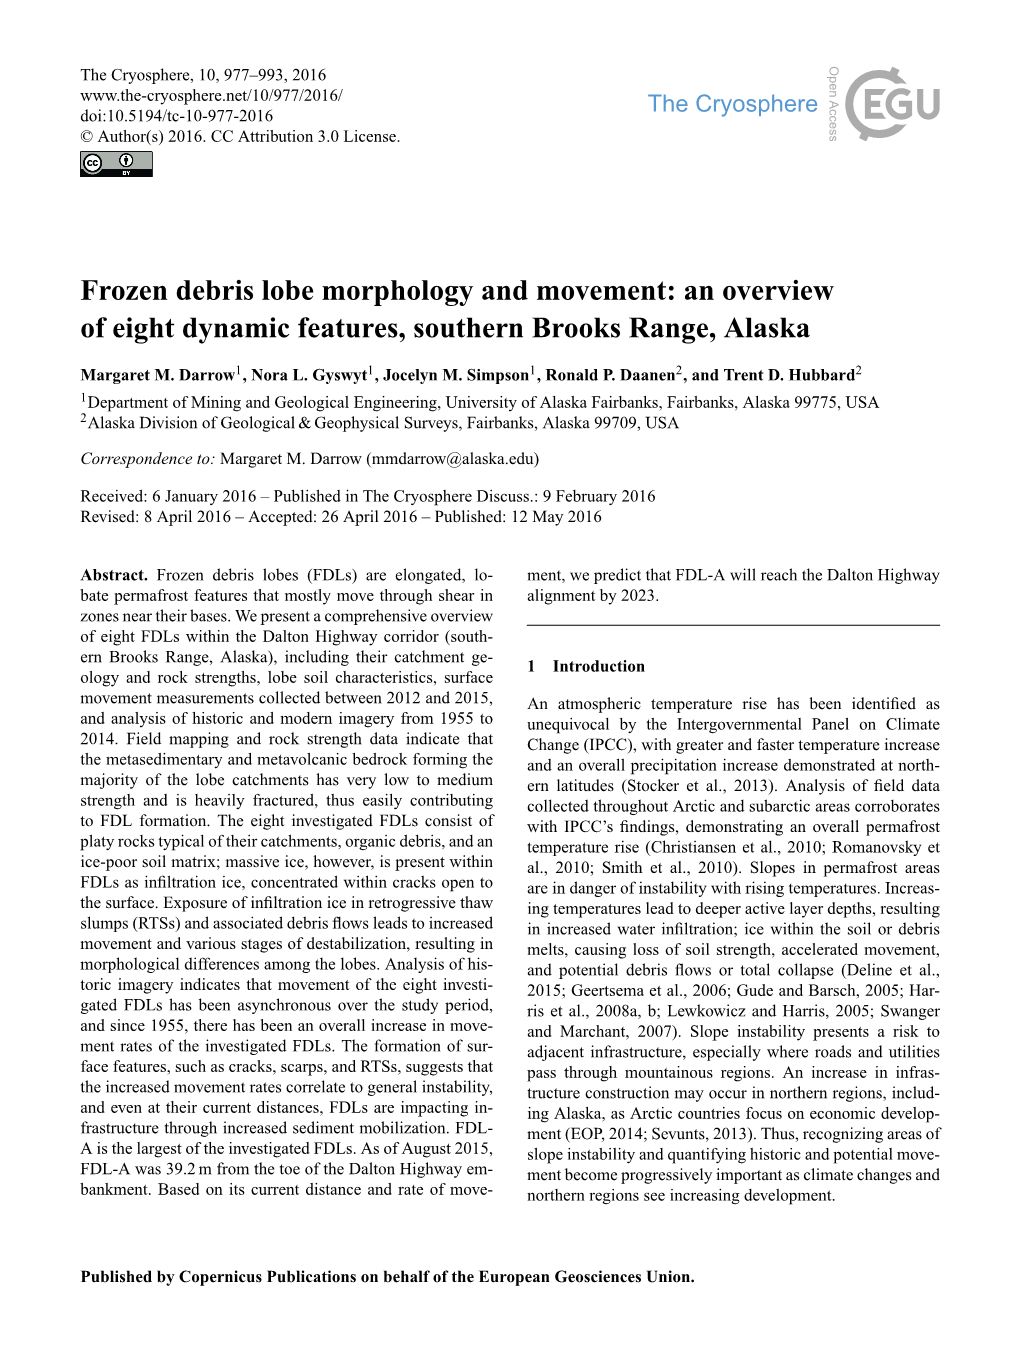 Frozen Debris Lobe Morphology and Movement: an Overview of Eight Dynamic Features, Southern Brooks Range, Alaska